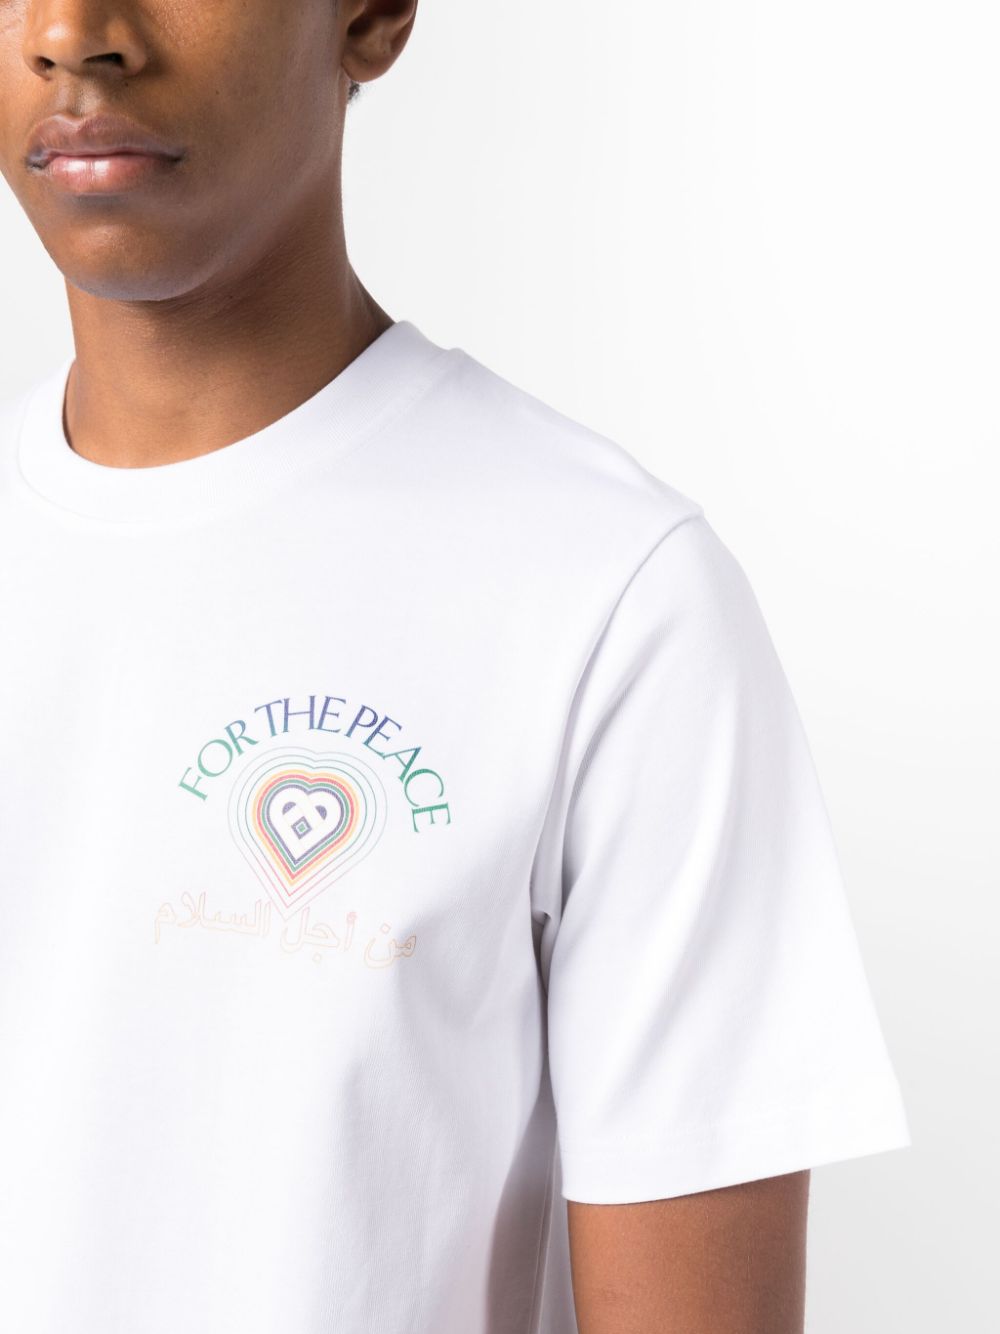 For The Peace cotton T-shirt